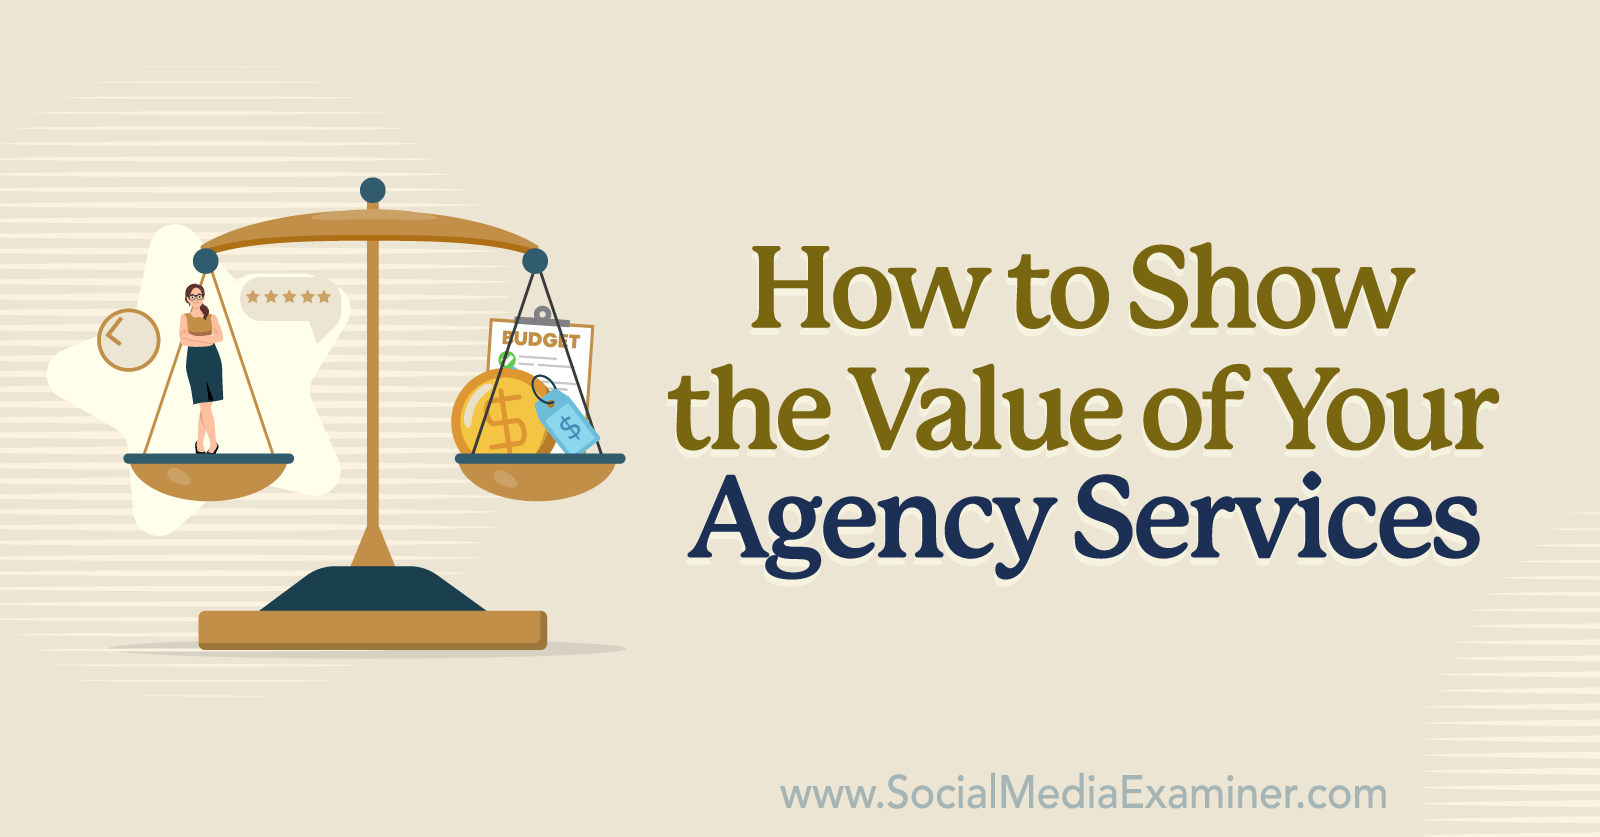 How to Show the Value of Your Agency Services by Social Media Examiner